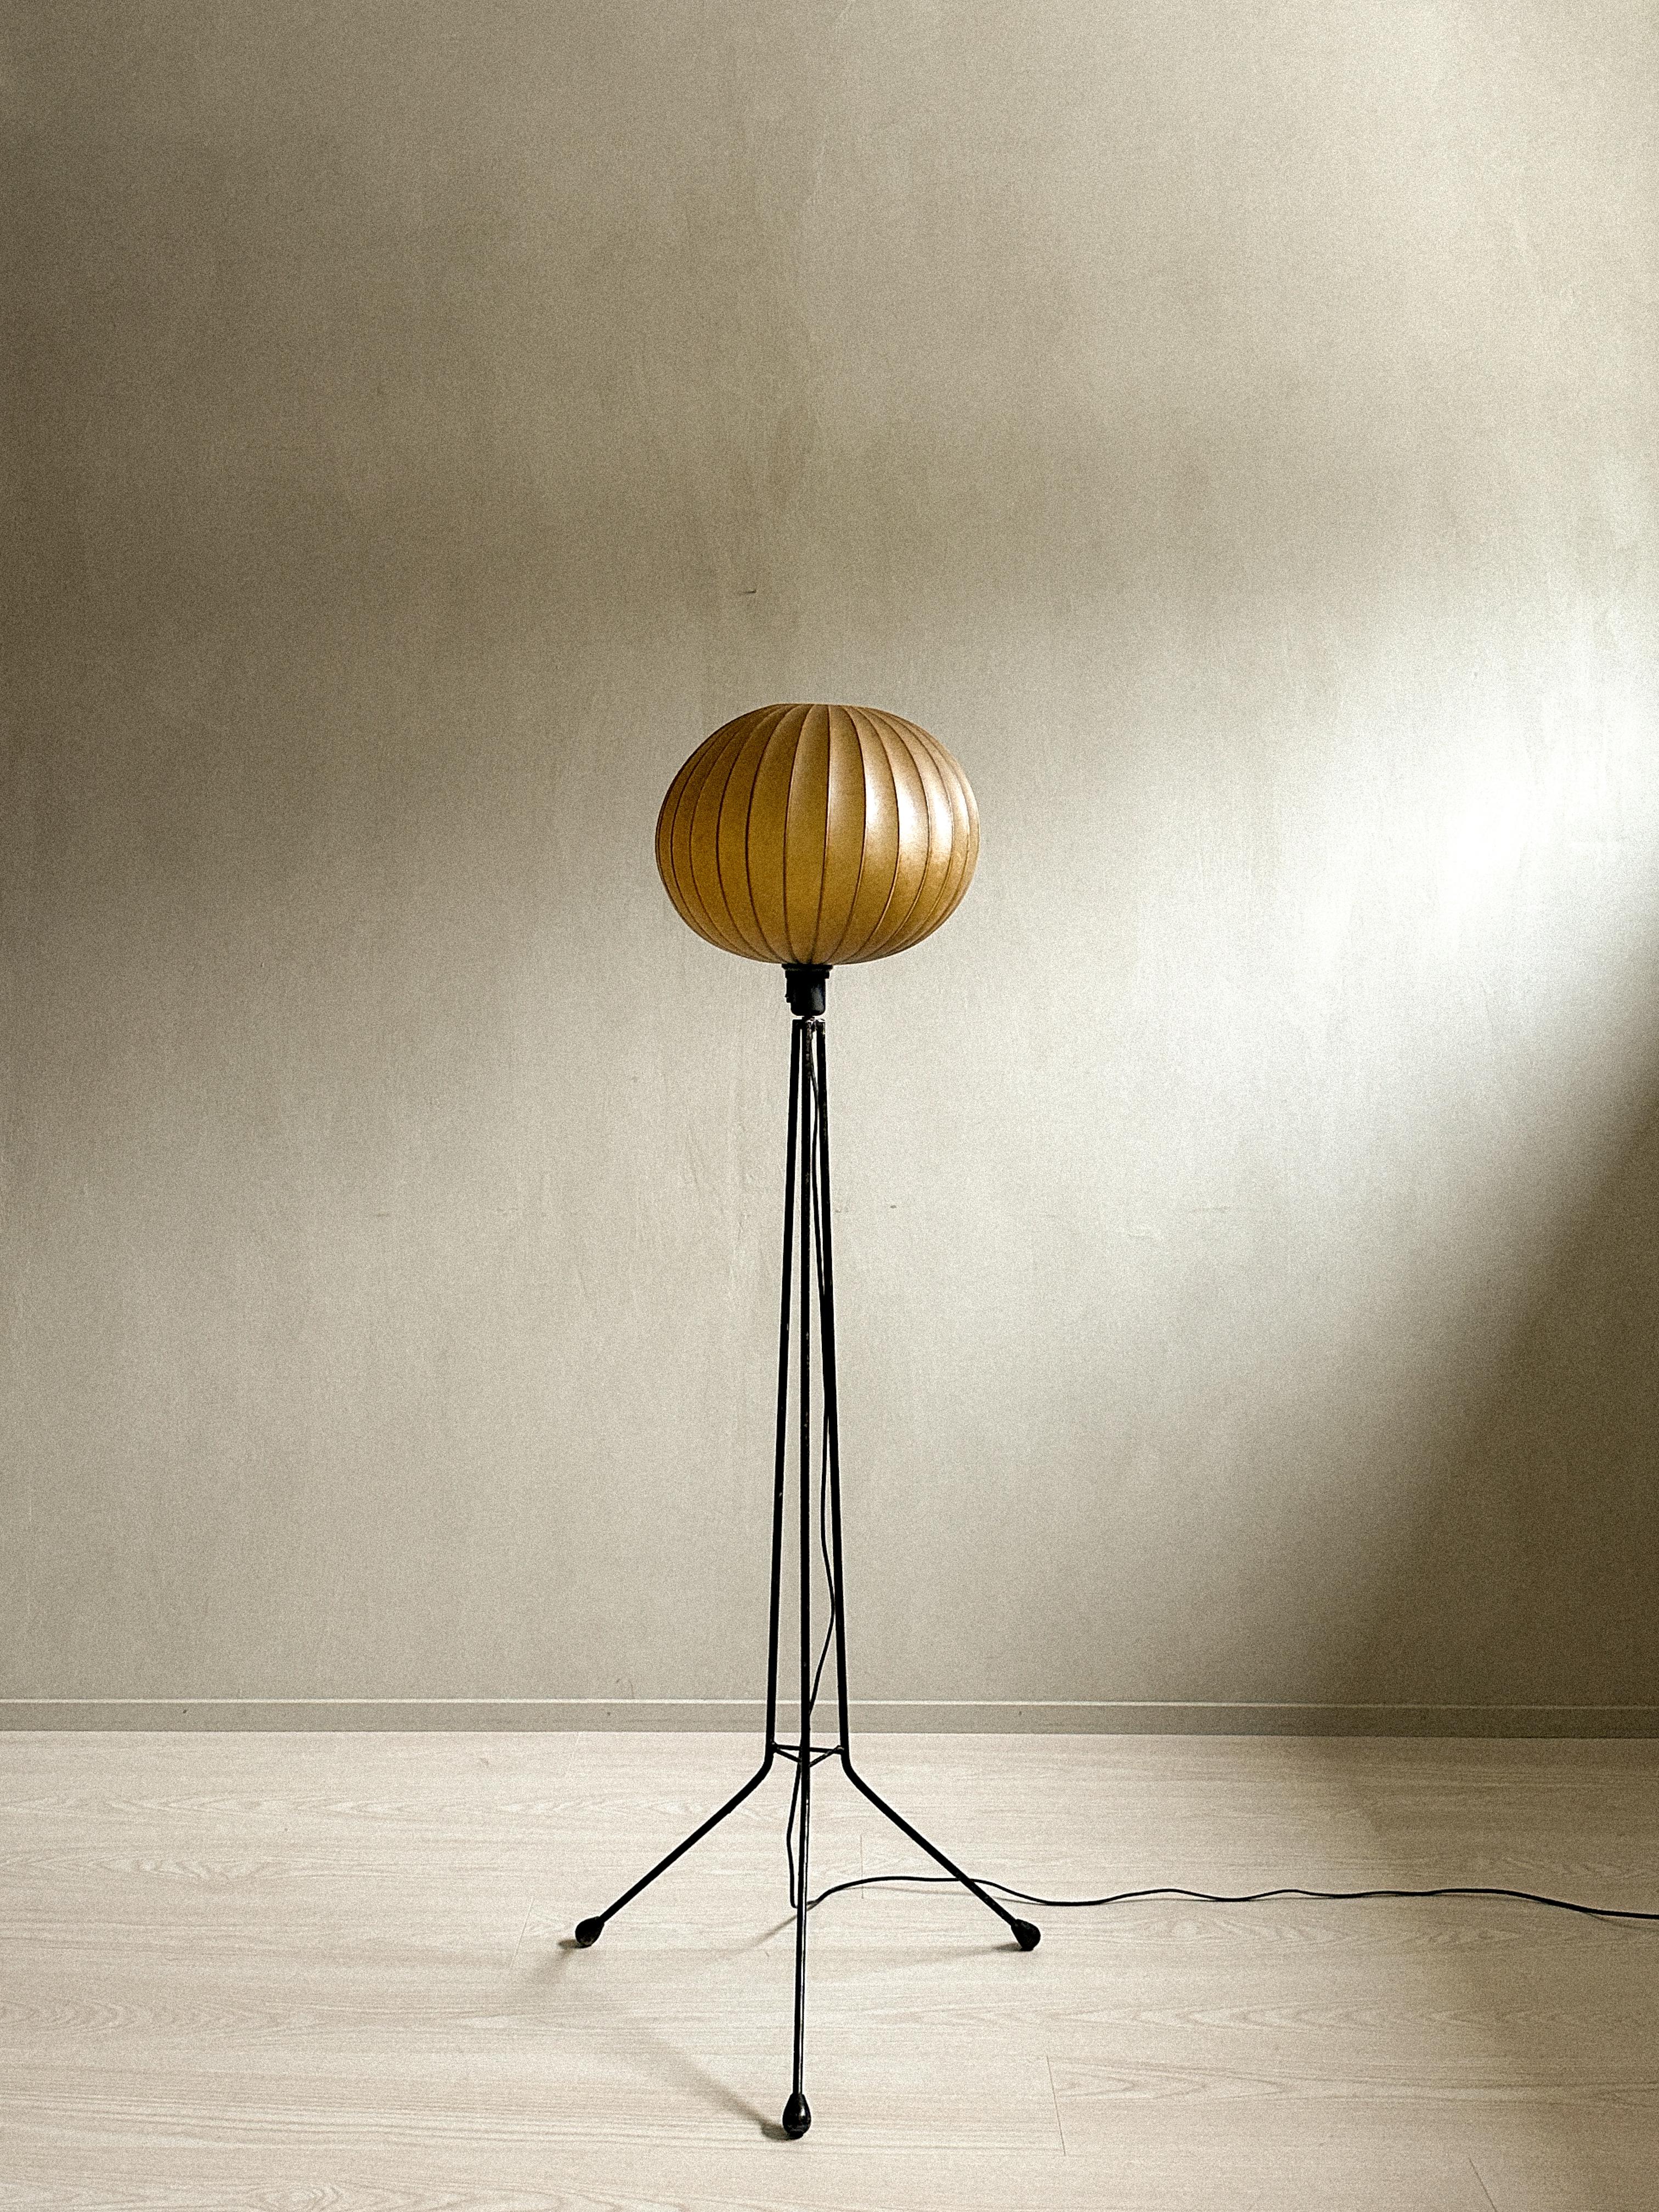 A beautiful mid-century Scandinavian lamp by Anonymous designer, with black metal tripod legs and round original cocoon shade. 

The electric wiring is original from the 50s with a EU standard wall plug.

Wear consistent with age and use. Scratches,